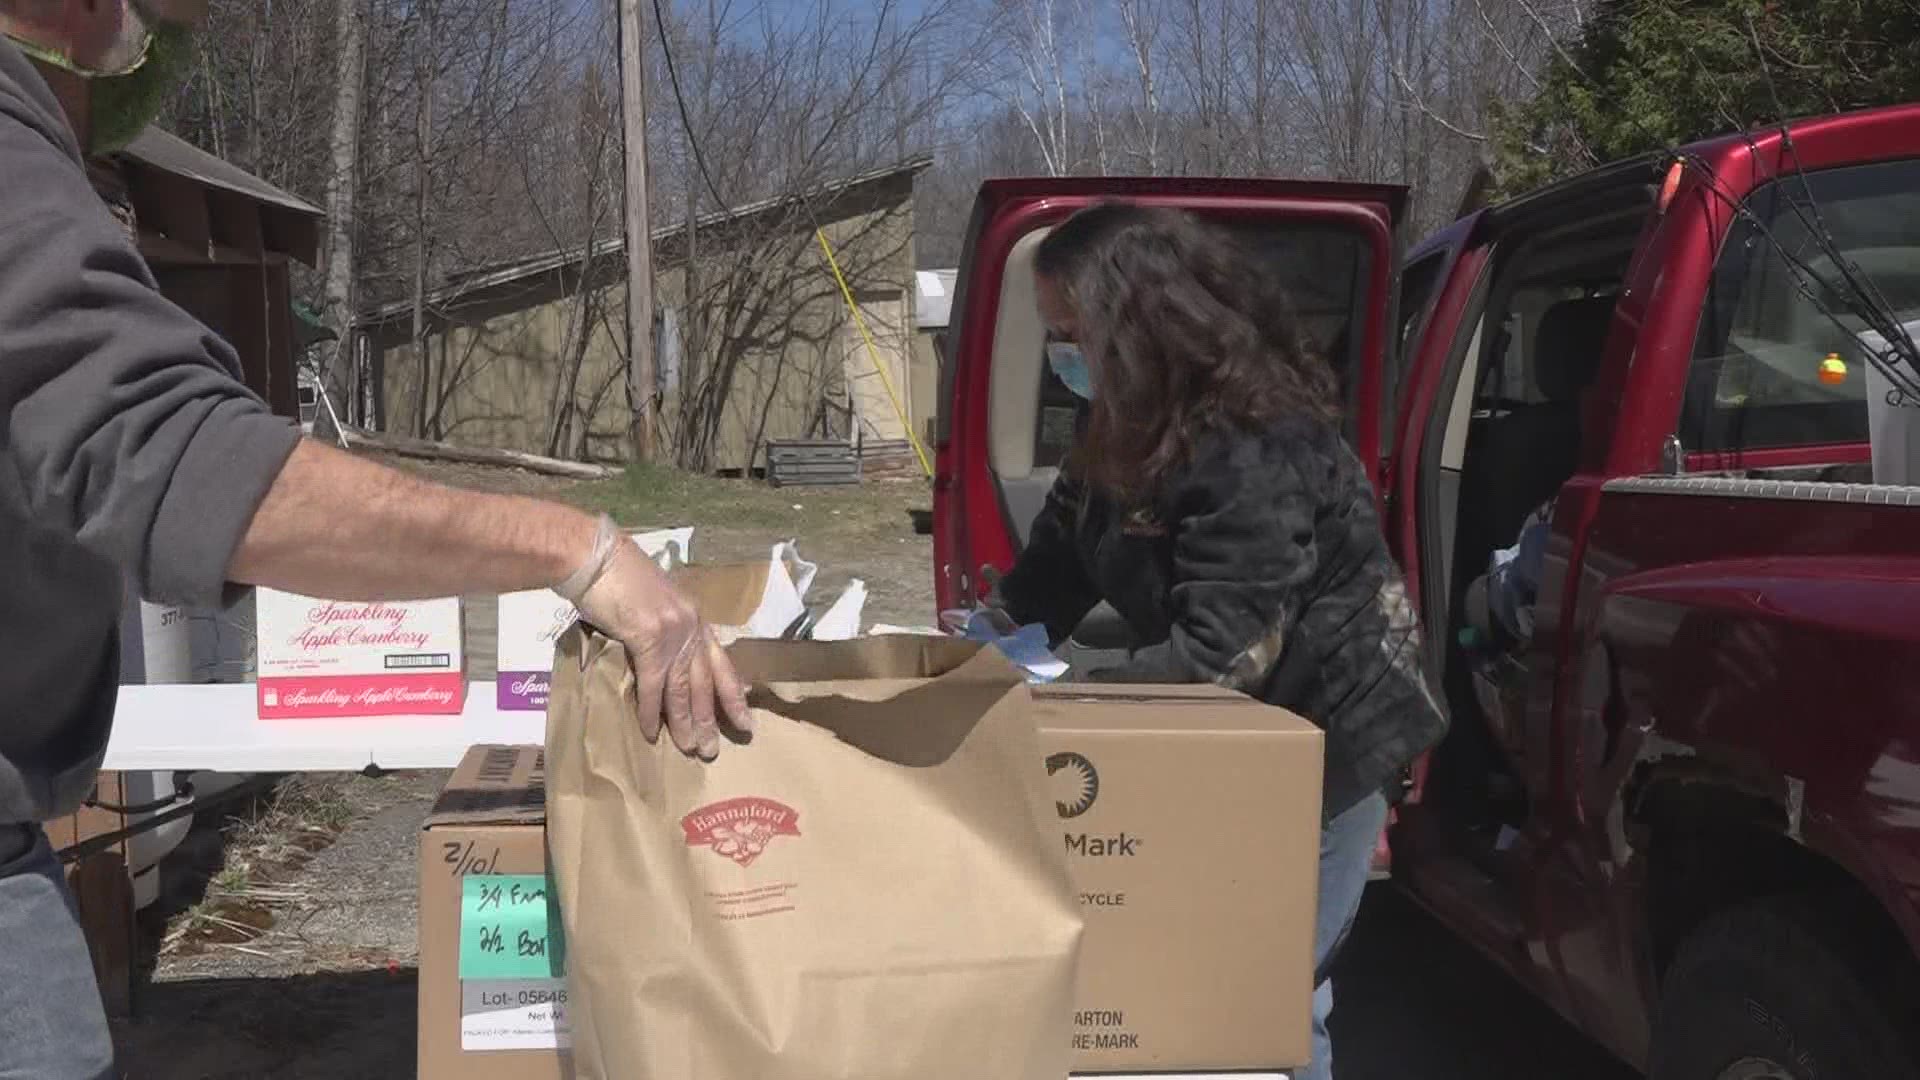 Winthrop Food Pantry gives boxes of food away during coronavirus, COVID-19 pandemic